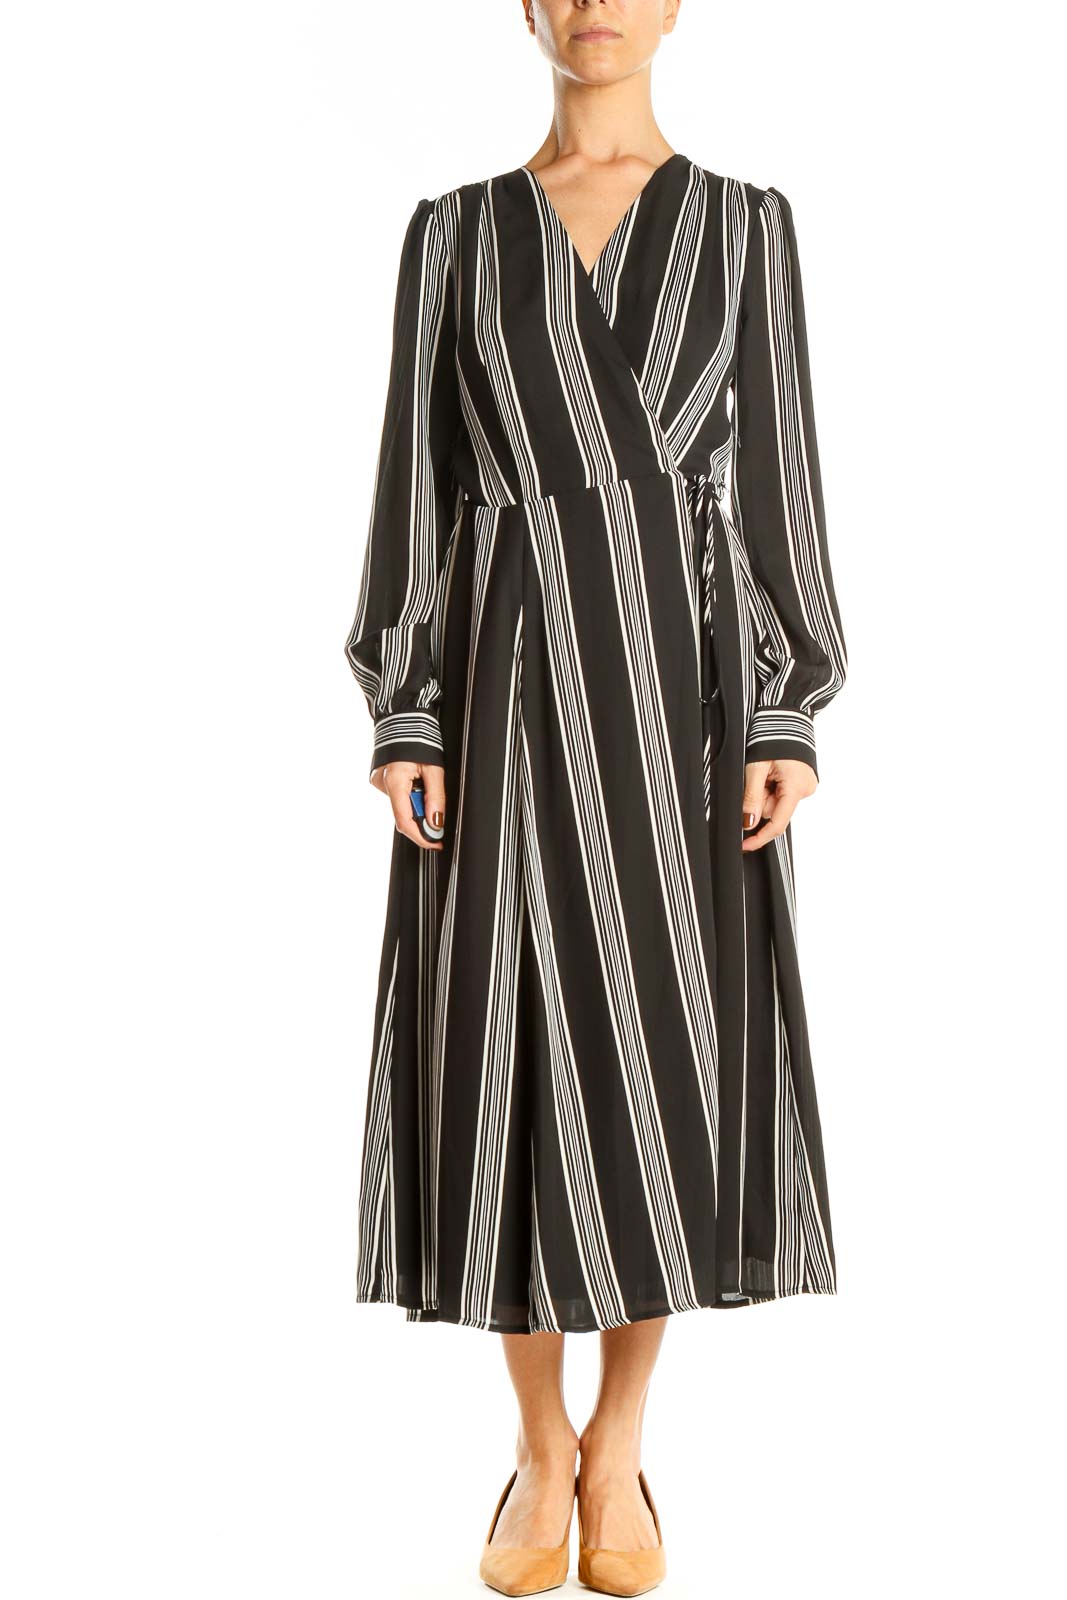 Black White Striped Classic Fit & Flare Dress Front